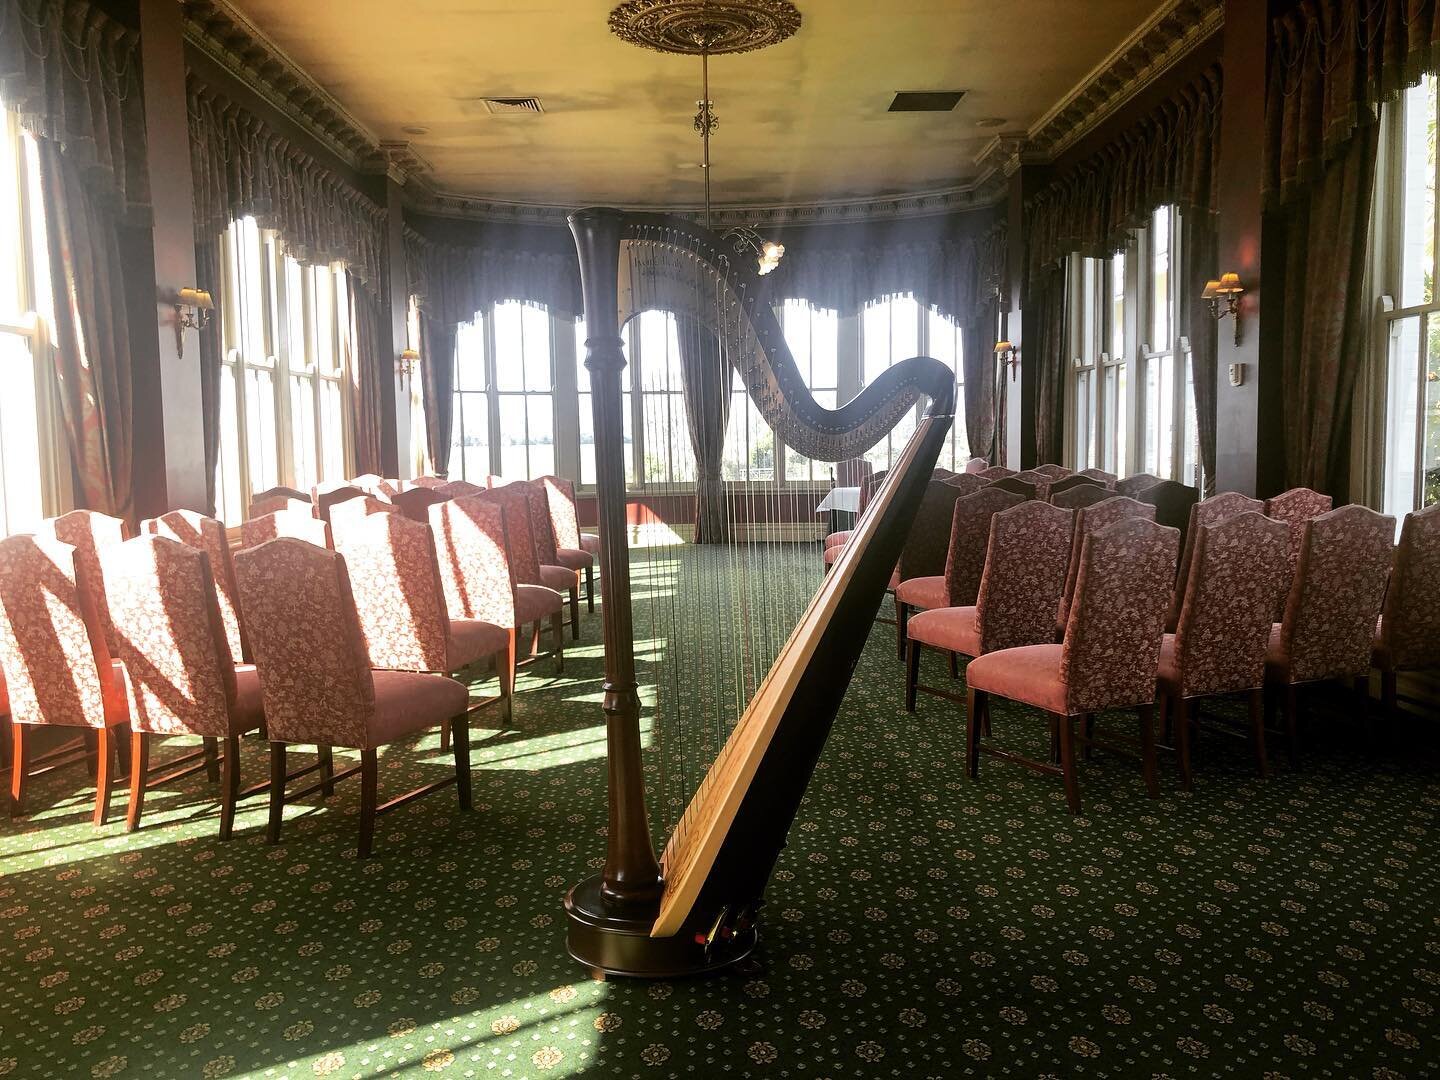 Harp &amp; cello for Tim &amp; Rachelle&rsquo;s wedding at the stunning heritage Chateau Yering. I had the pleasure of working with Tim when we were a part of a surprise wedding proposal. So much thought went into their song selections, it was a visi